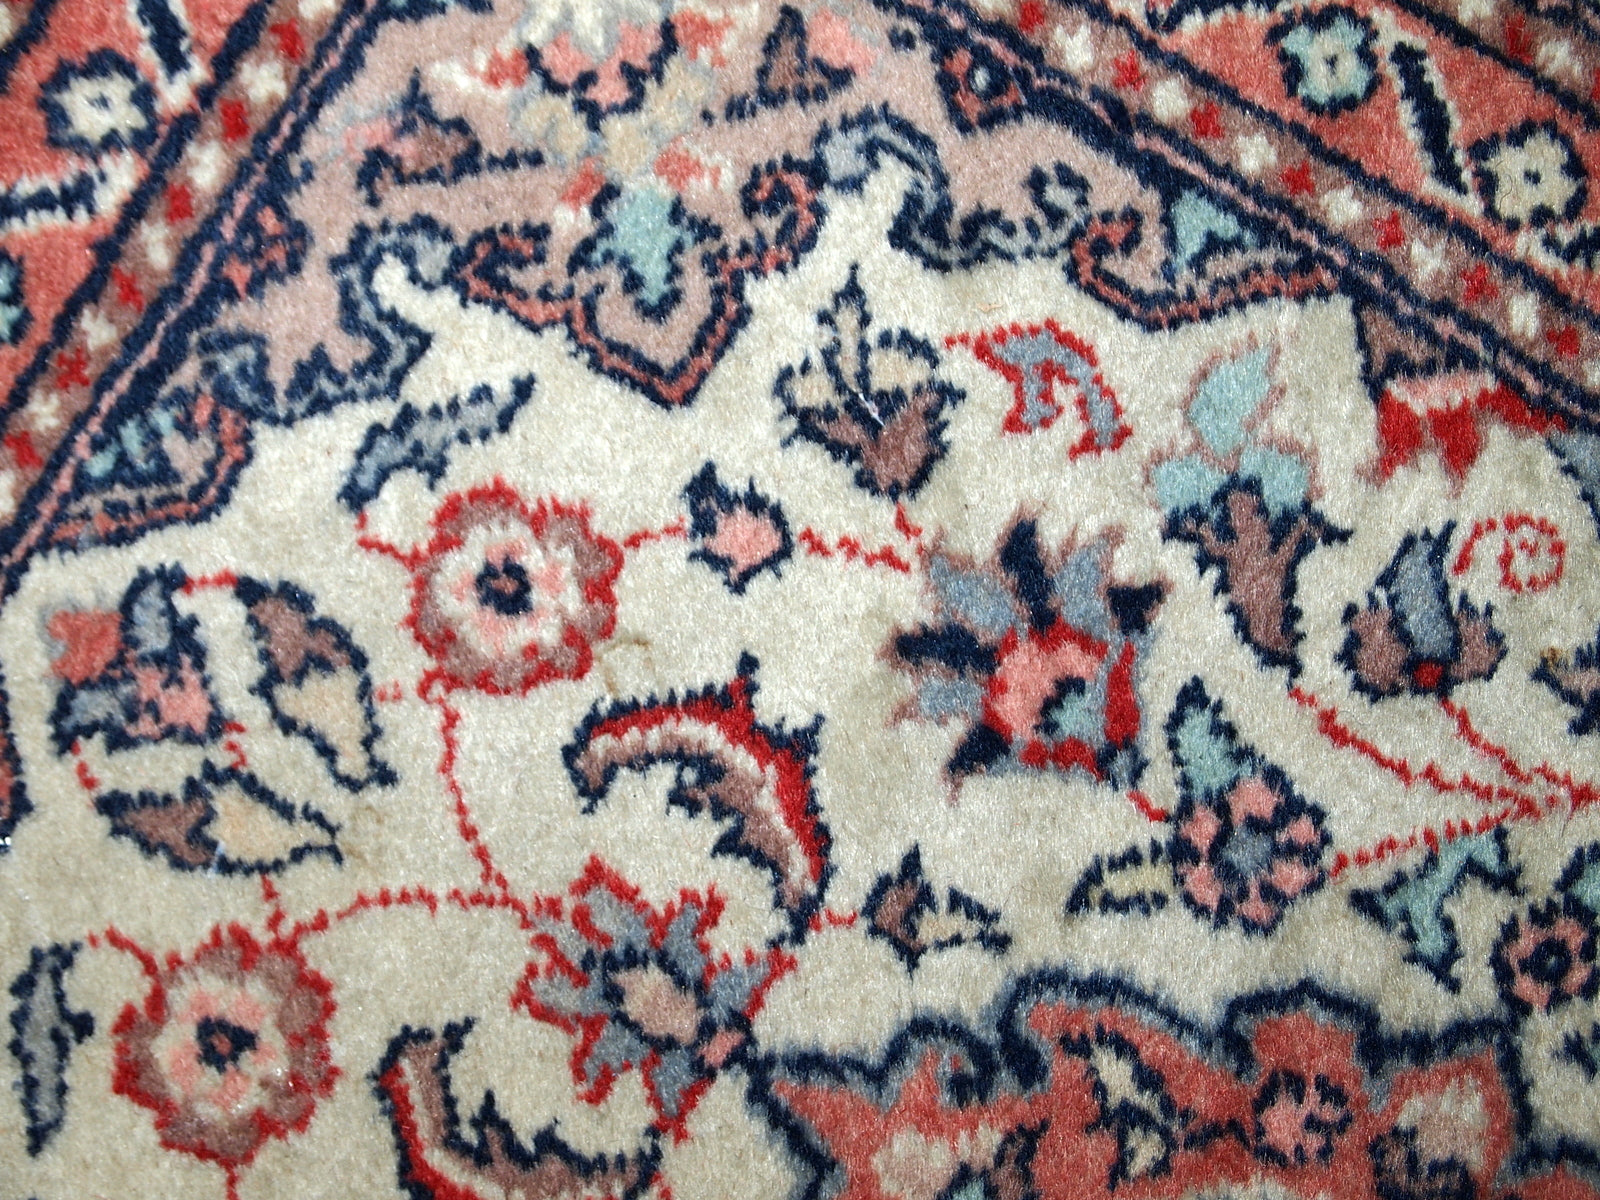 Vintage handmade Indian rug from the end of 20th century. The rug is in original good condition in a beige shade and floral design.